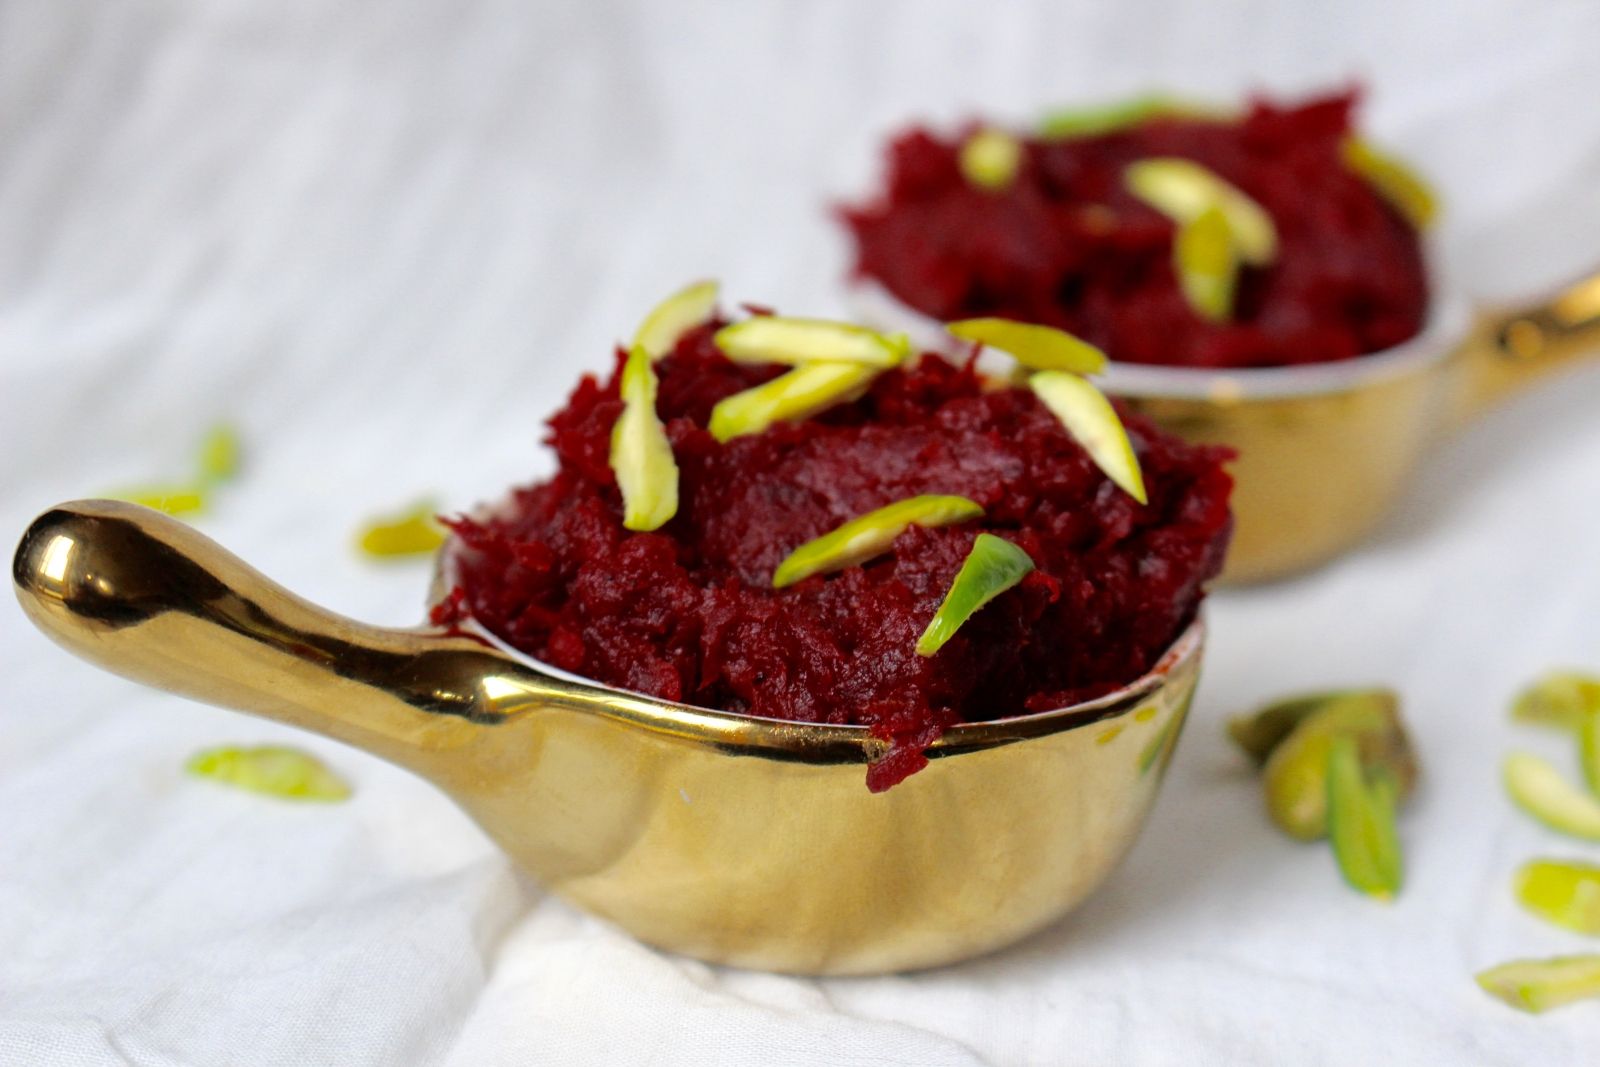 Some Recipes you can make with your fresh beetroot